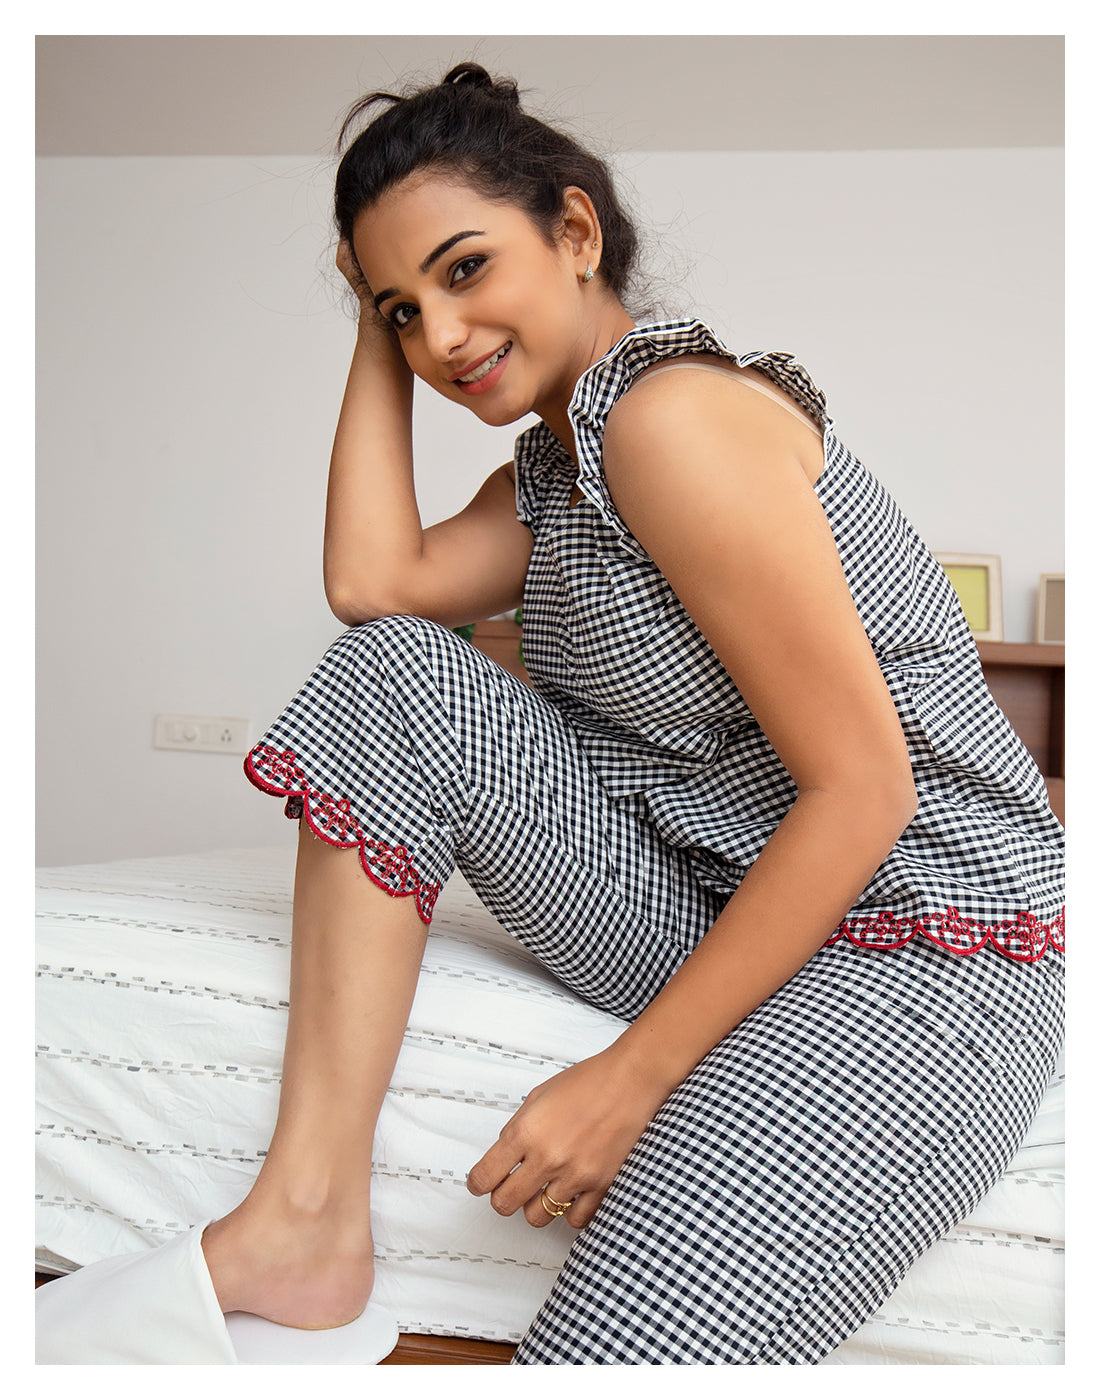 Say Hi to comfortable sleep with night suits for women | Navyas Fashion